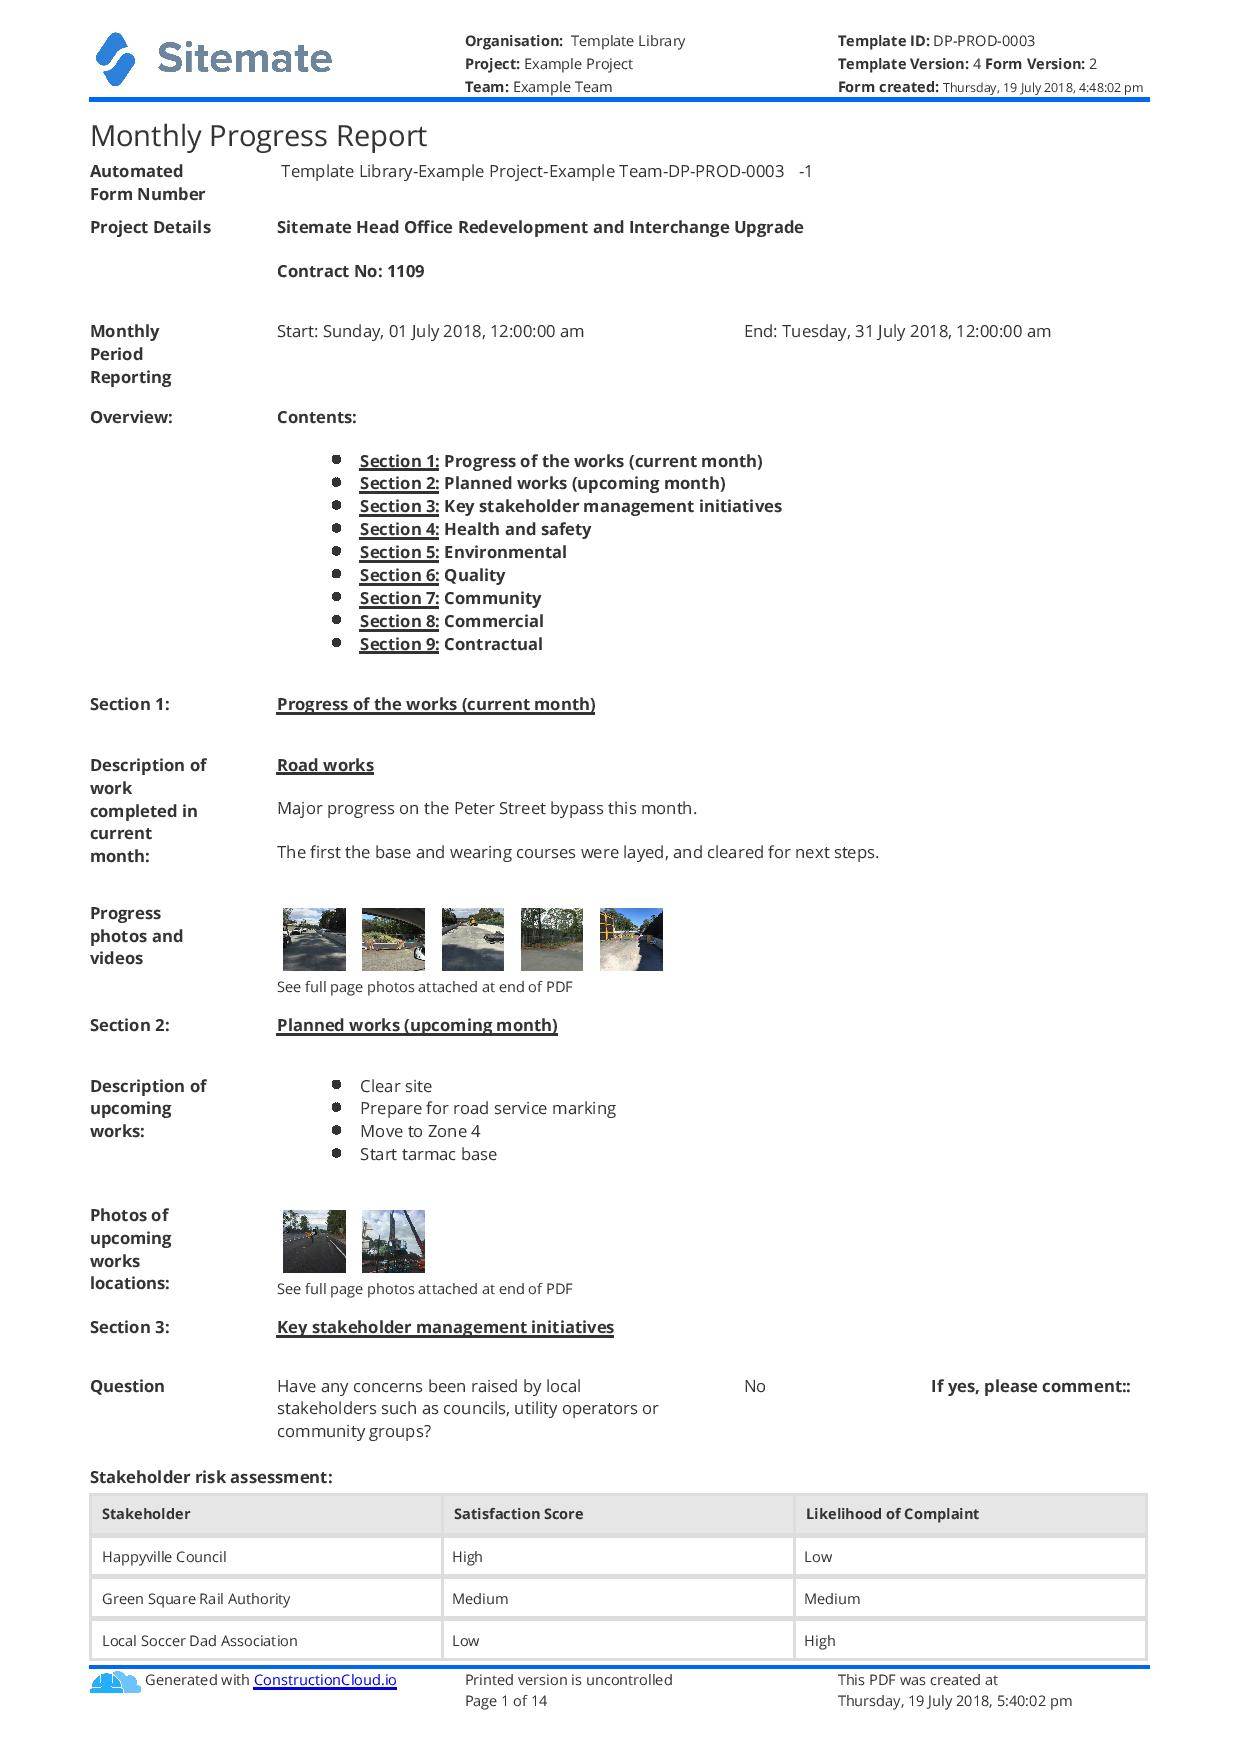 Monthly Construction Progress Report Template: Use This For Progress Report Template For Construction Project